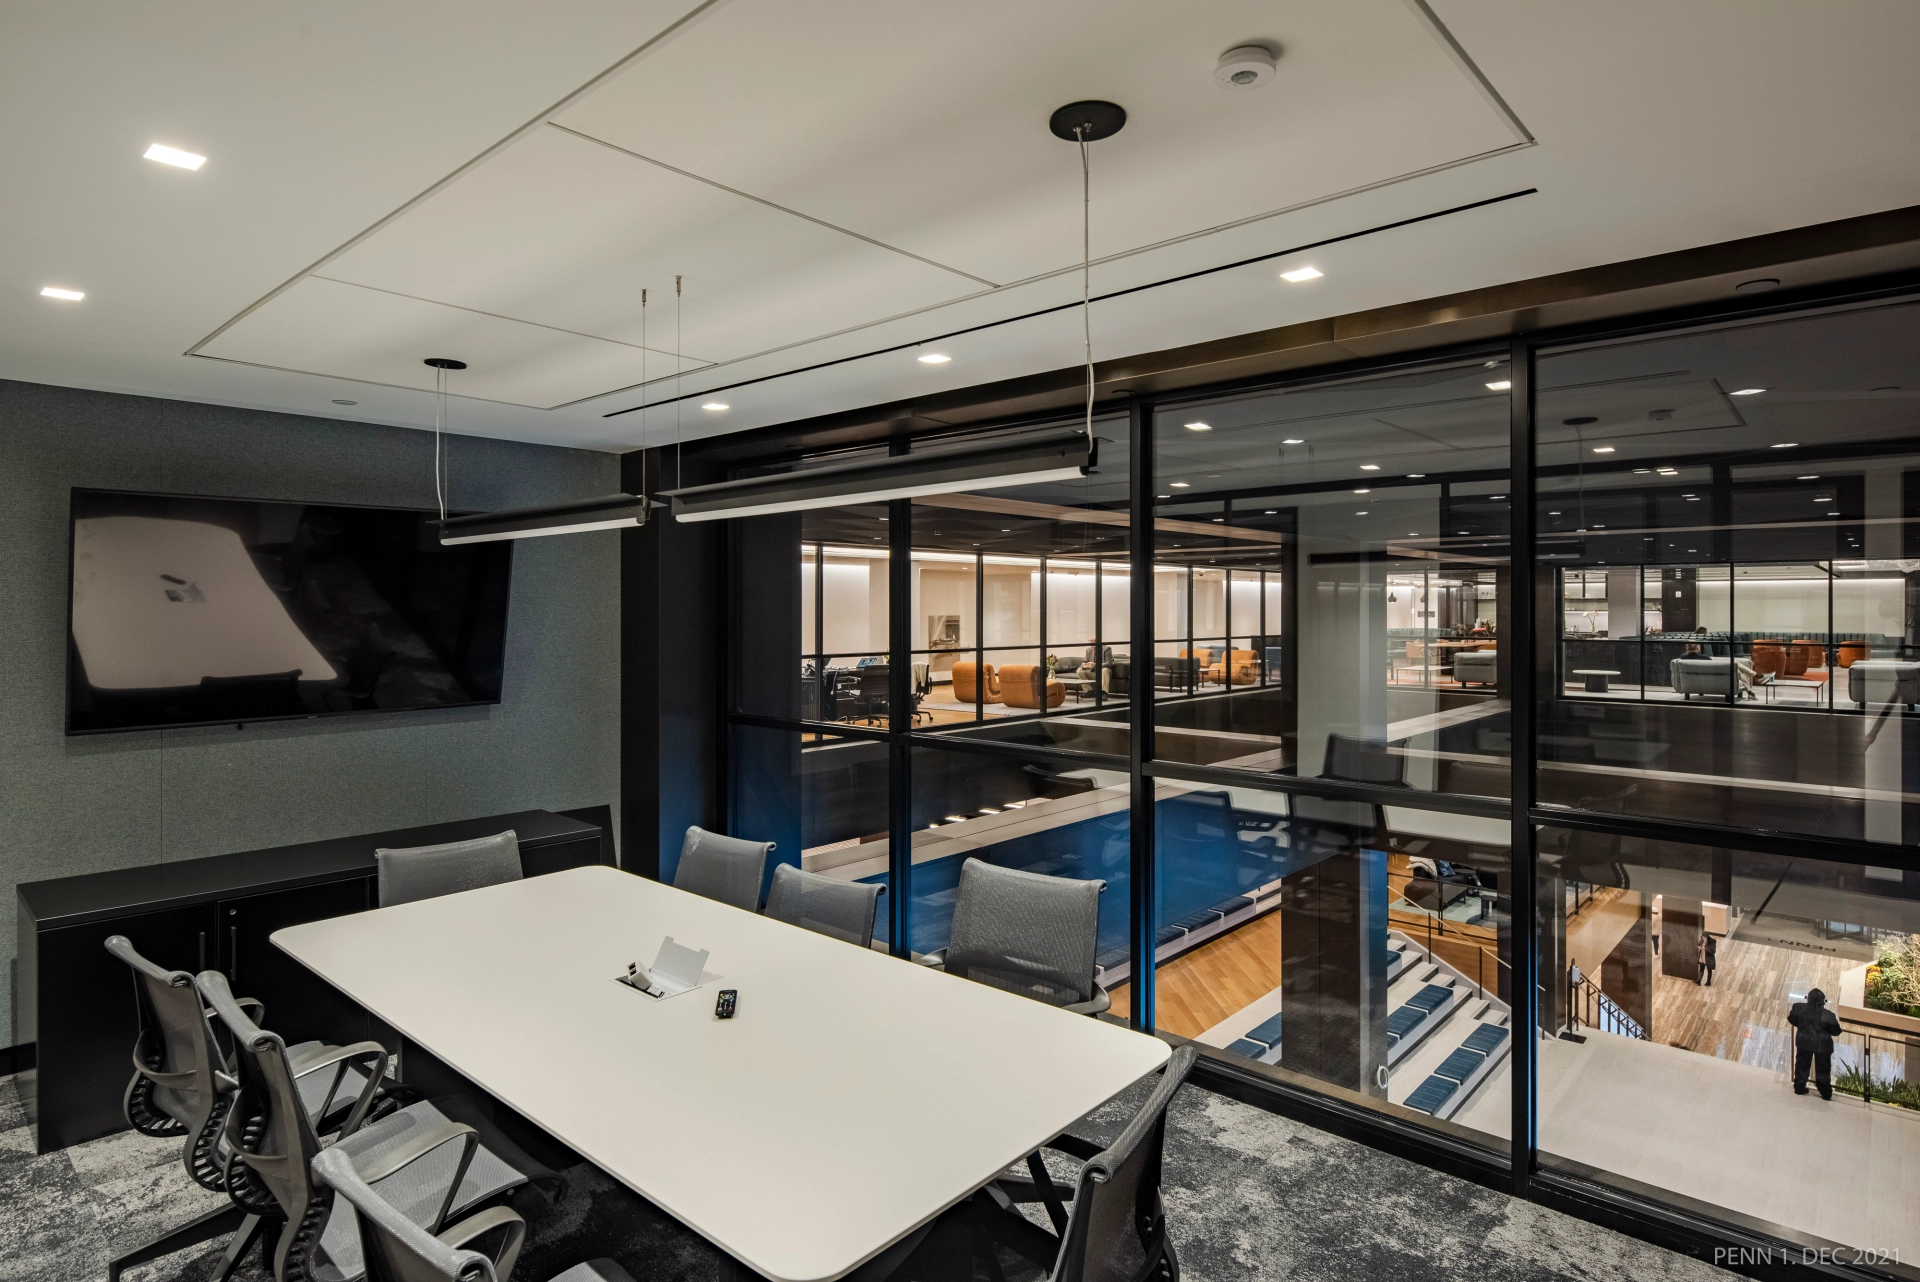 An office conference room in New York with glass walls and a table for coworking purposes.